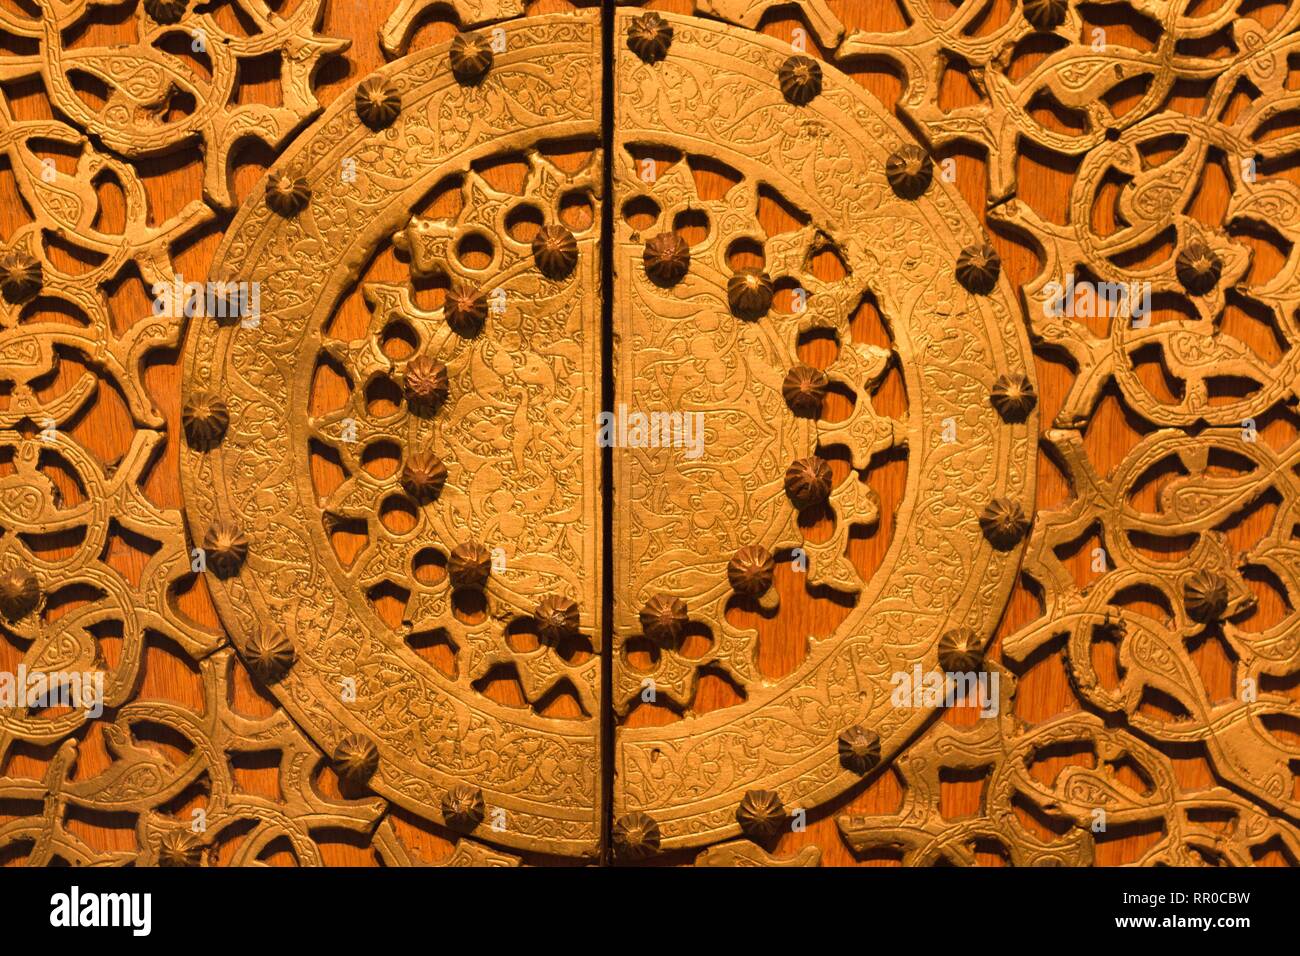 Beautiful ornament made of precious materials. The ornament is made on the wooden surface of which for many years. Stock Photo